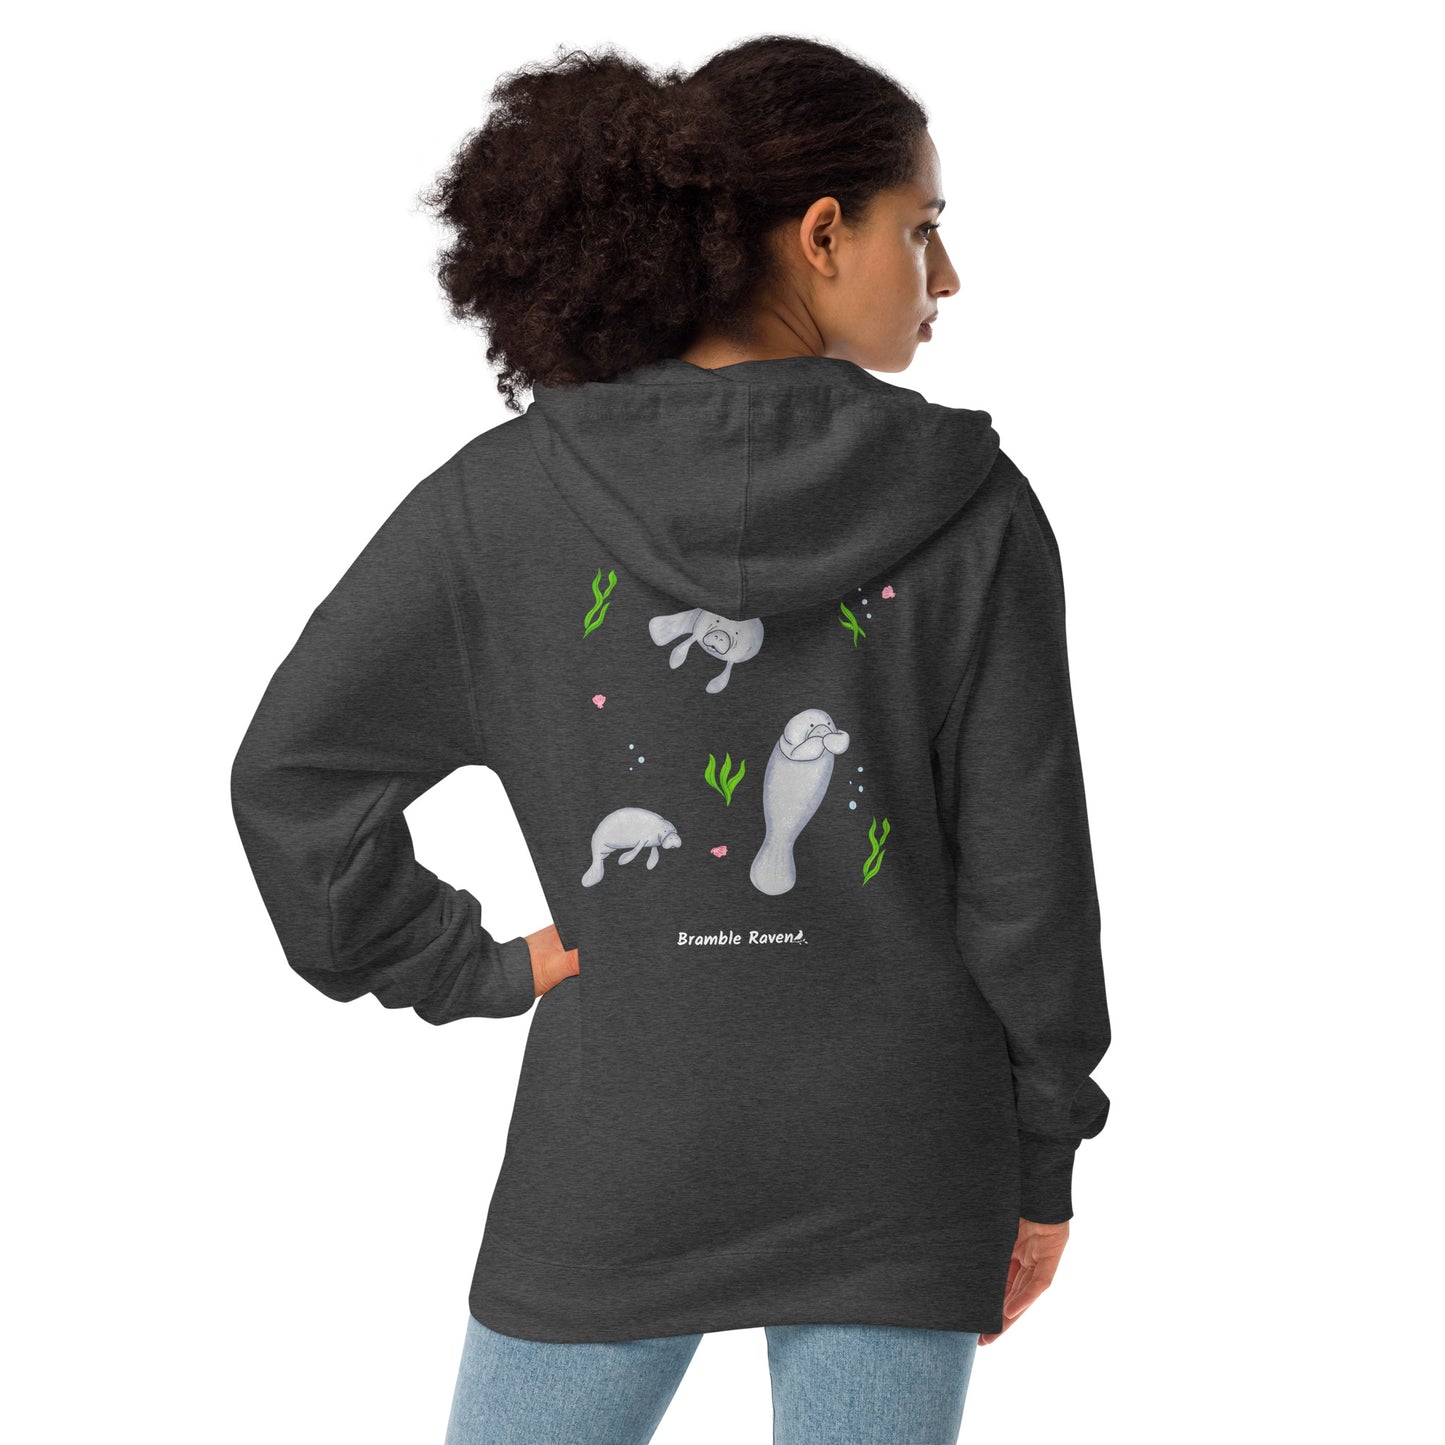 Charcoal heather grey colored unisex zip-up hoodie. Features three manatees with seaweed, seashells, and bubbles on the back. It is made of soft, premium quality fleece fabric and has a jersey-lined hood. Made with 100% cotton face and 80% cotton, 20% polyester blend fleece (Charcoal Heather is 55% cotton, 45% polyester). Features metal eyelets and zipper. Back view shown on female model.